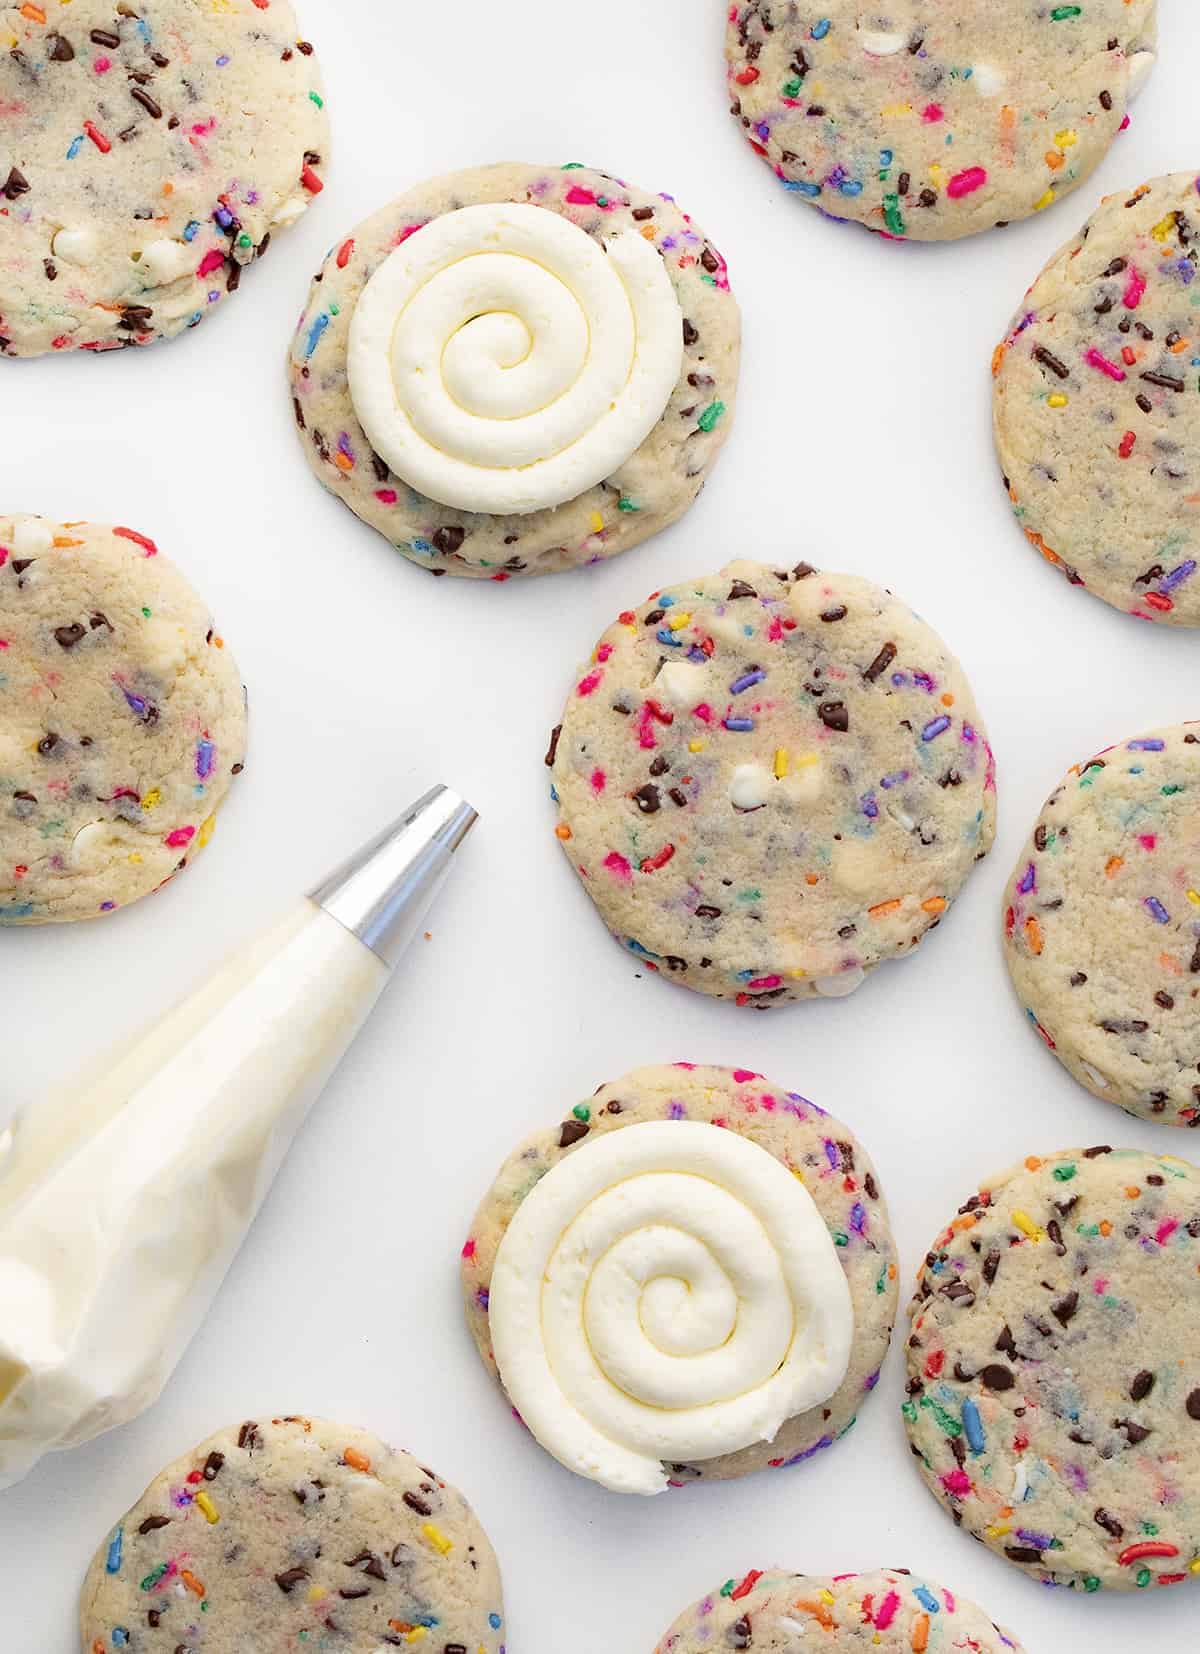 Adding Buttercream Frosting in a Swirl to Birthday Cake Cookies